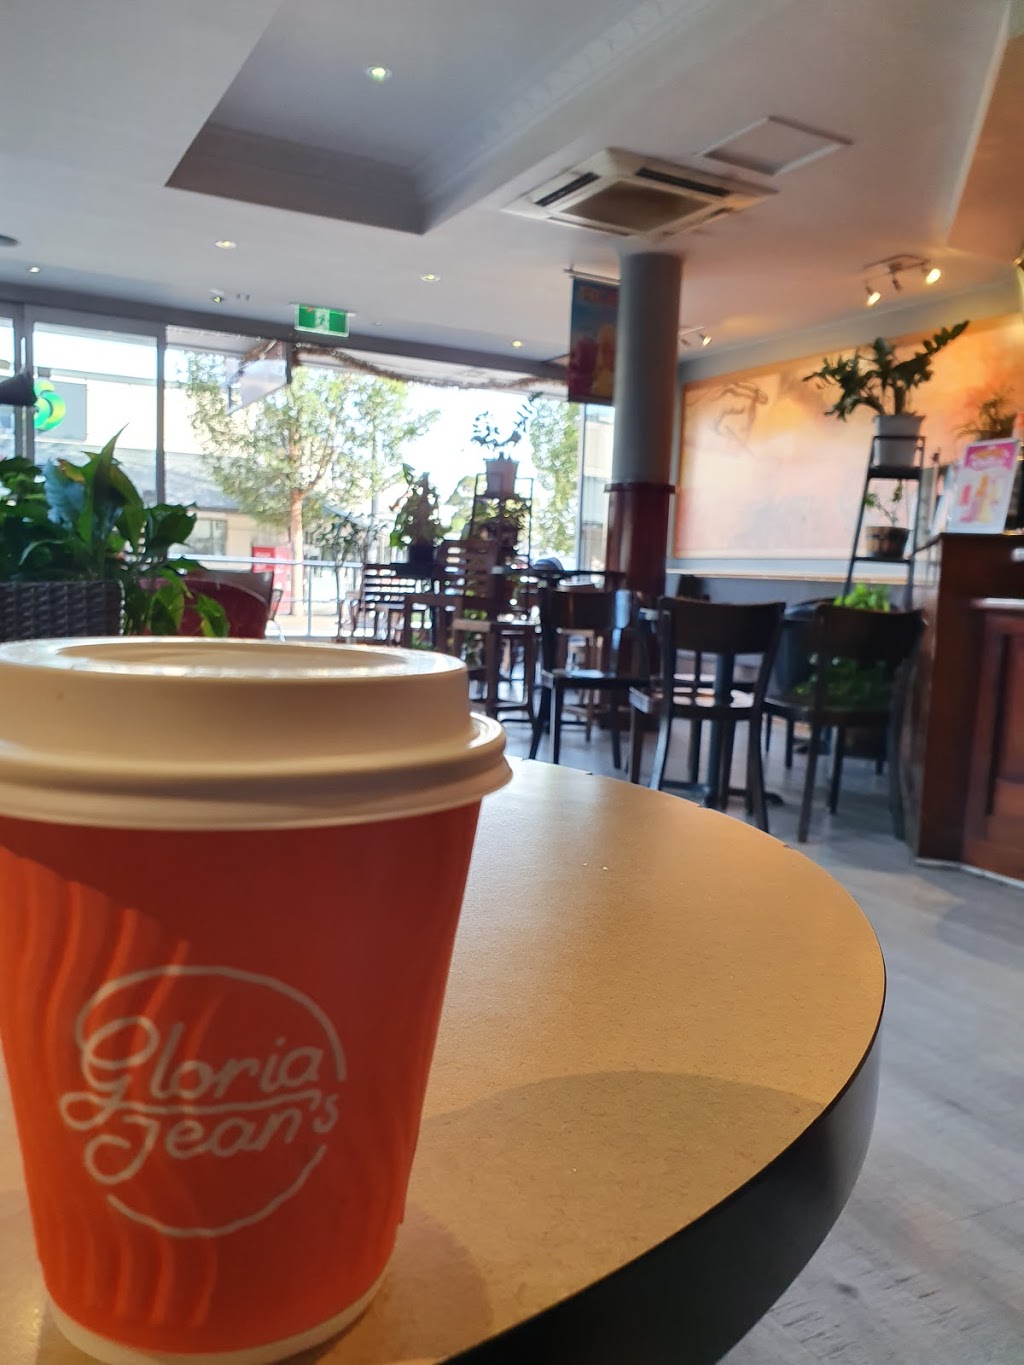 Gloria Jeans Coffees Revesby Abbey | Abbey, Shop 15/19-29 Marco Ave, Revesby NSW 2212, Australia | Phone: (02) 9792 2699